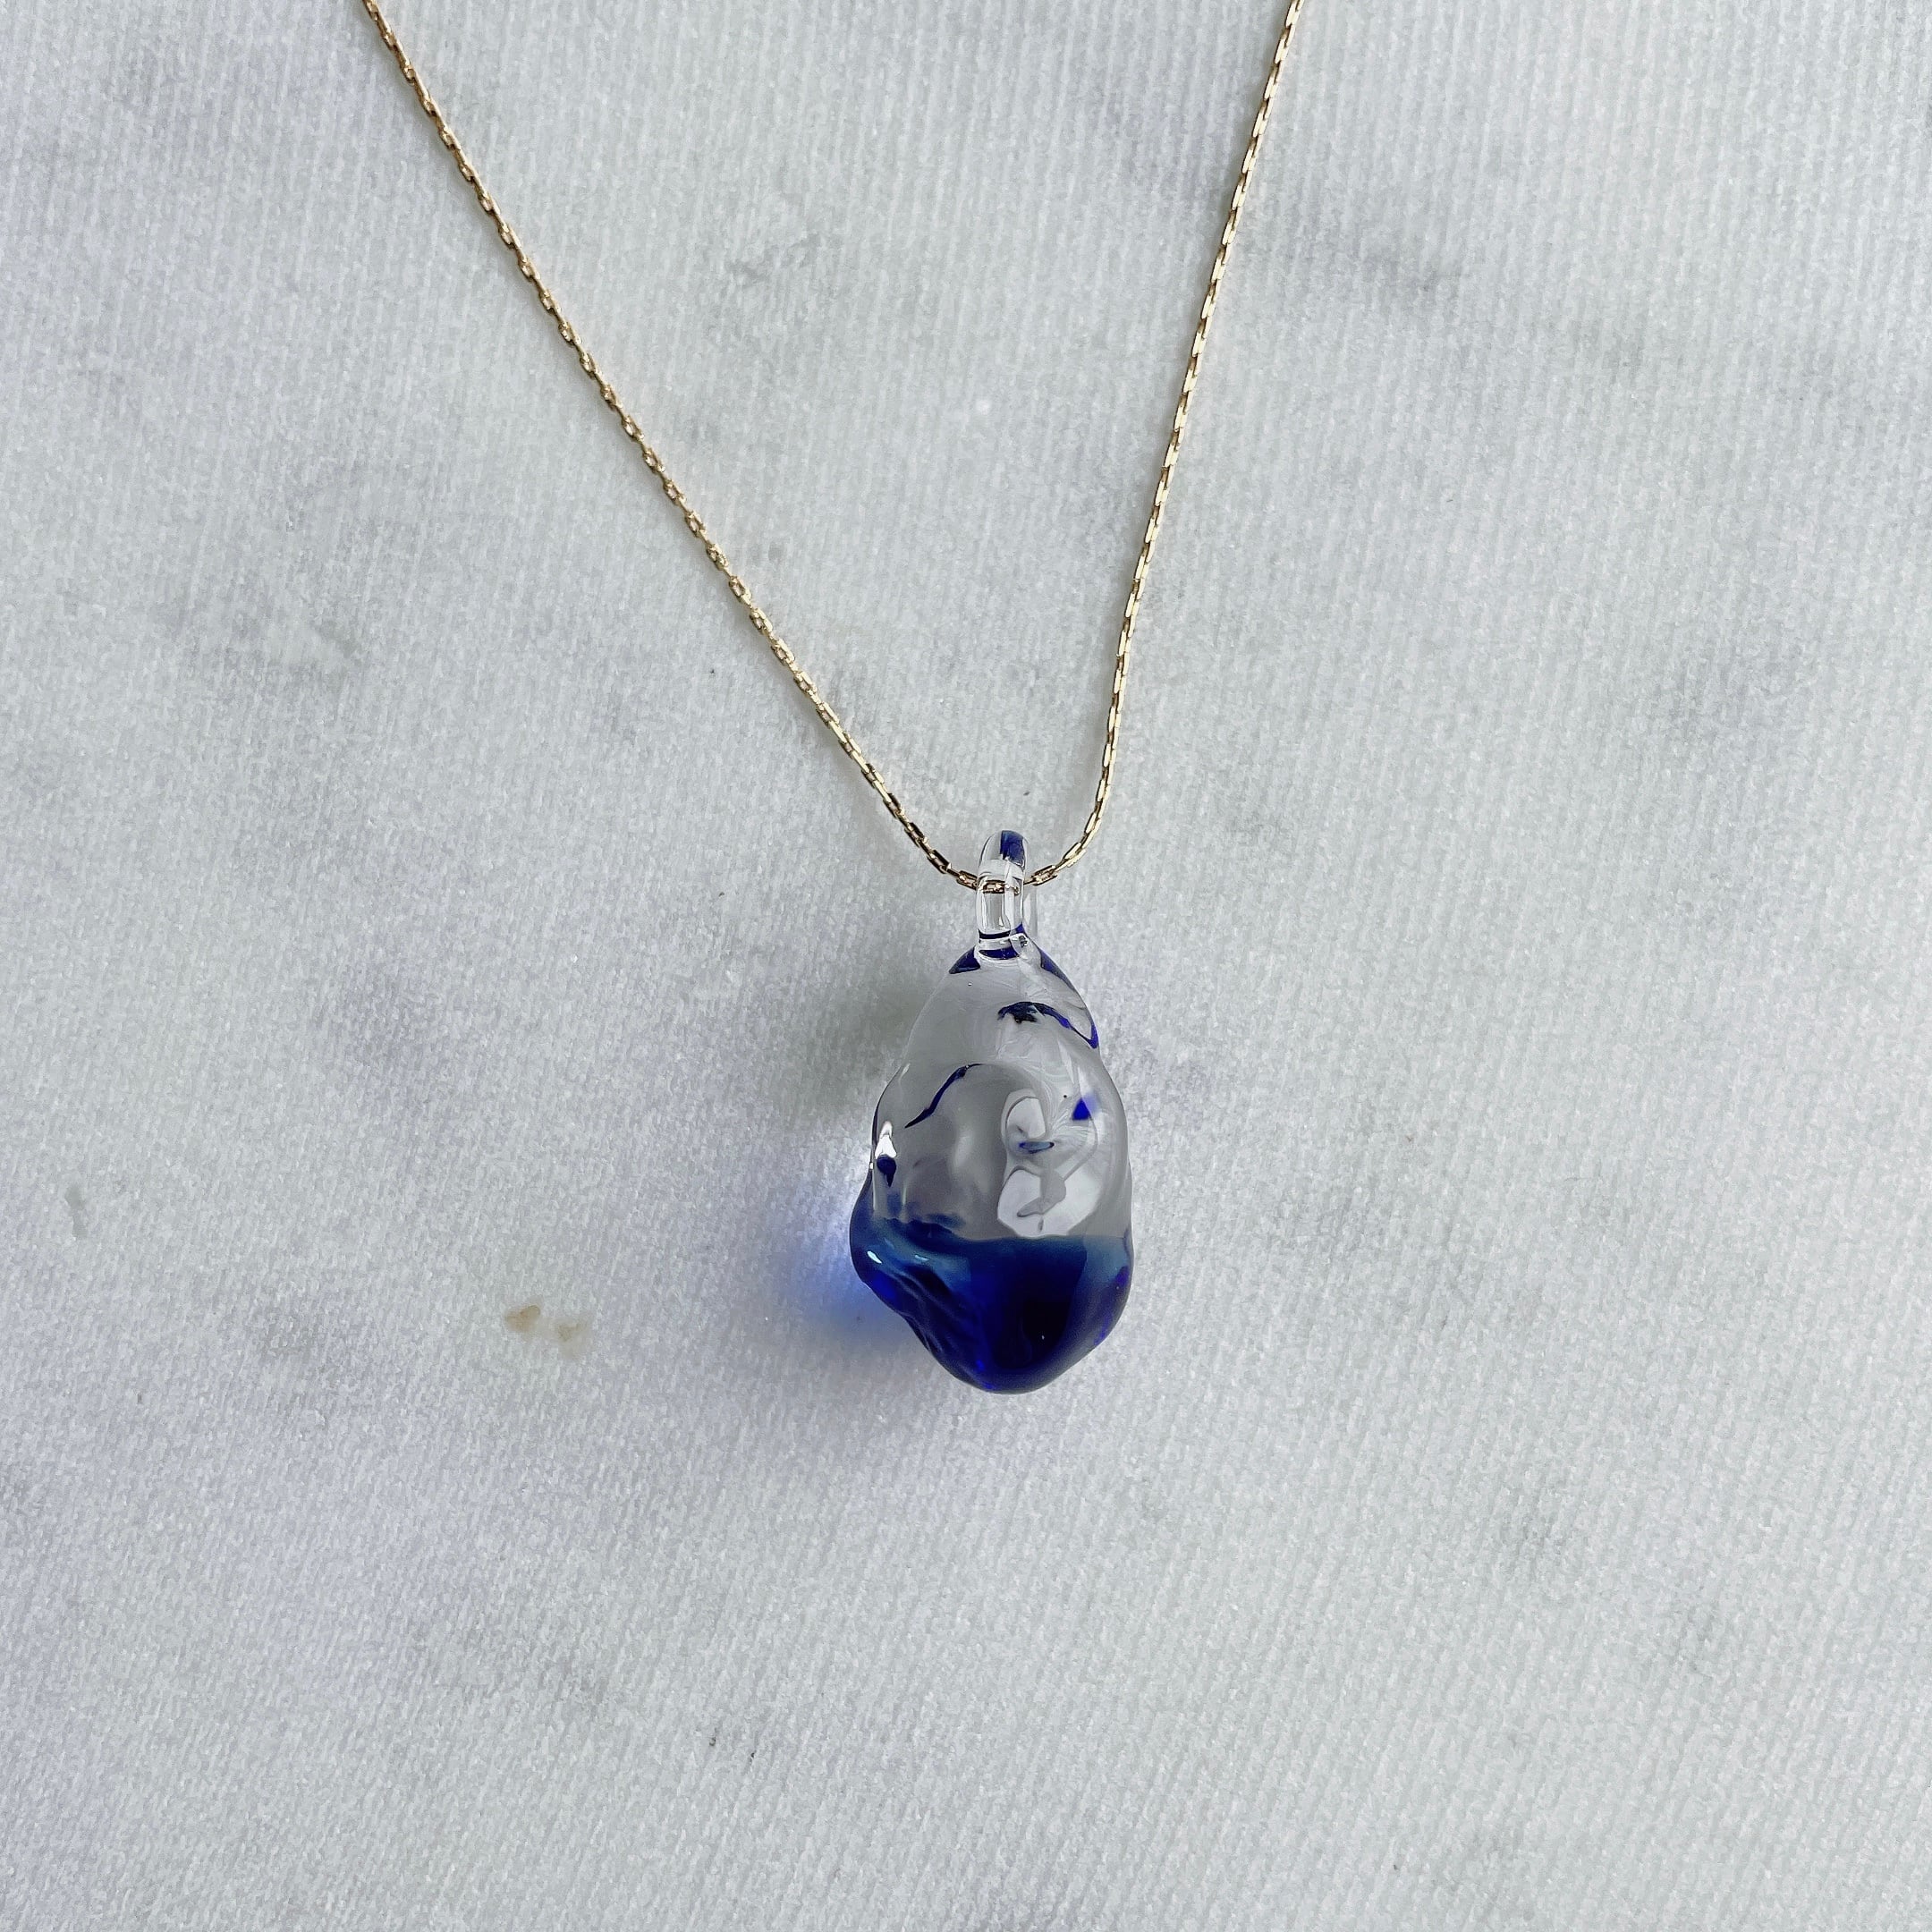 Glass Drop Necklace ガラスドロップネックレス | dix ONLINE STORE | ディスのアクセサリーオンラインショップ  powered by BASE